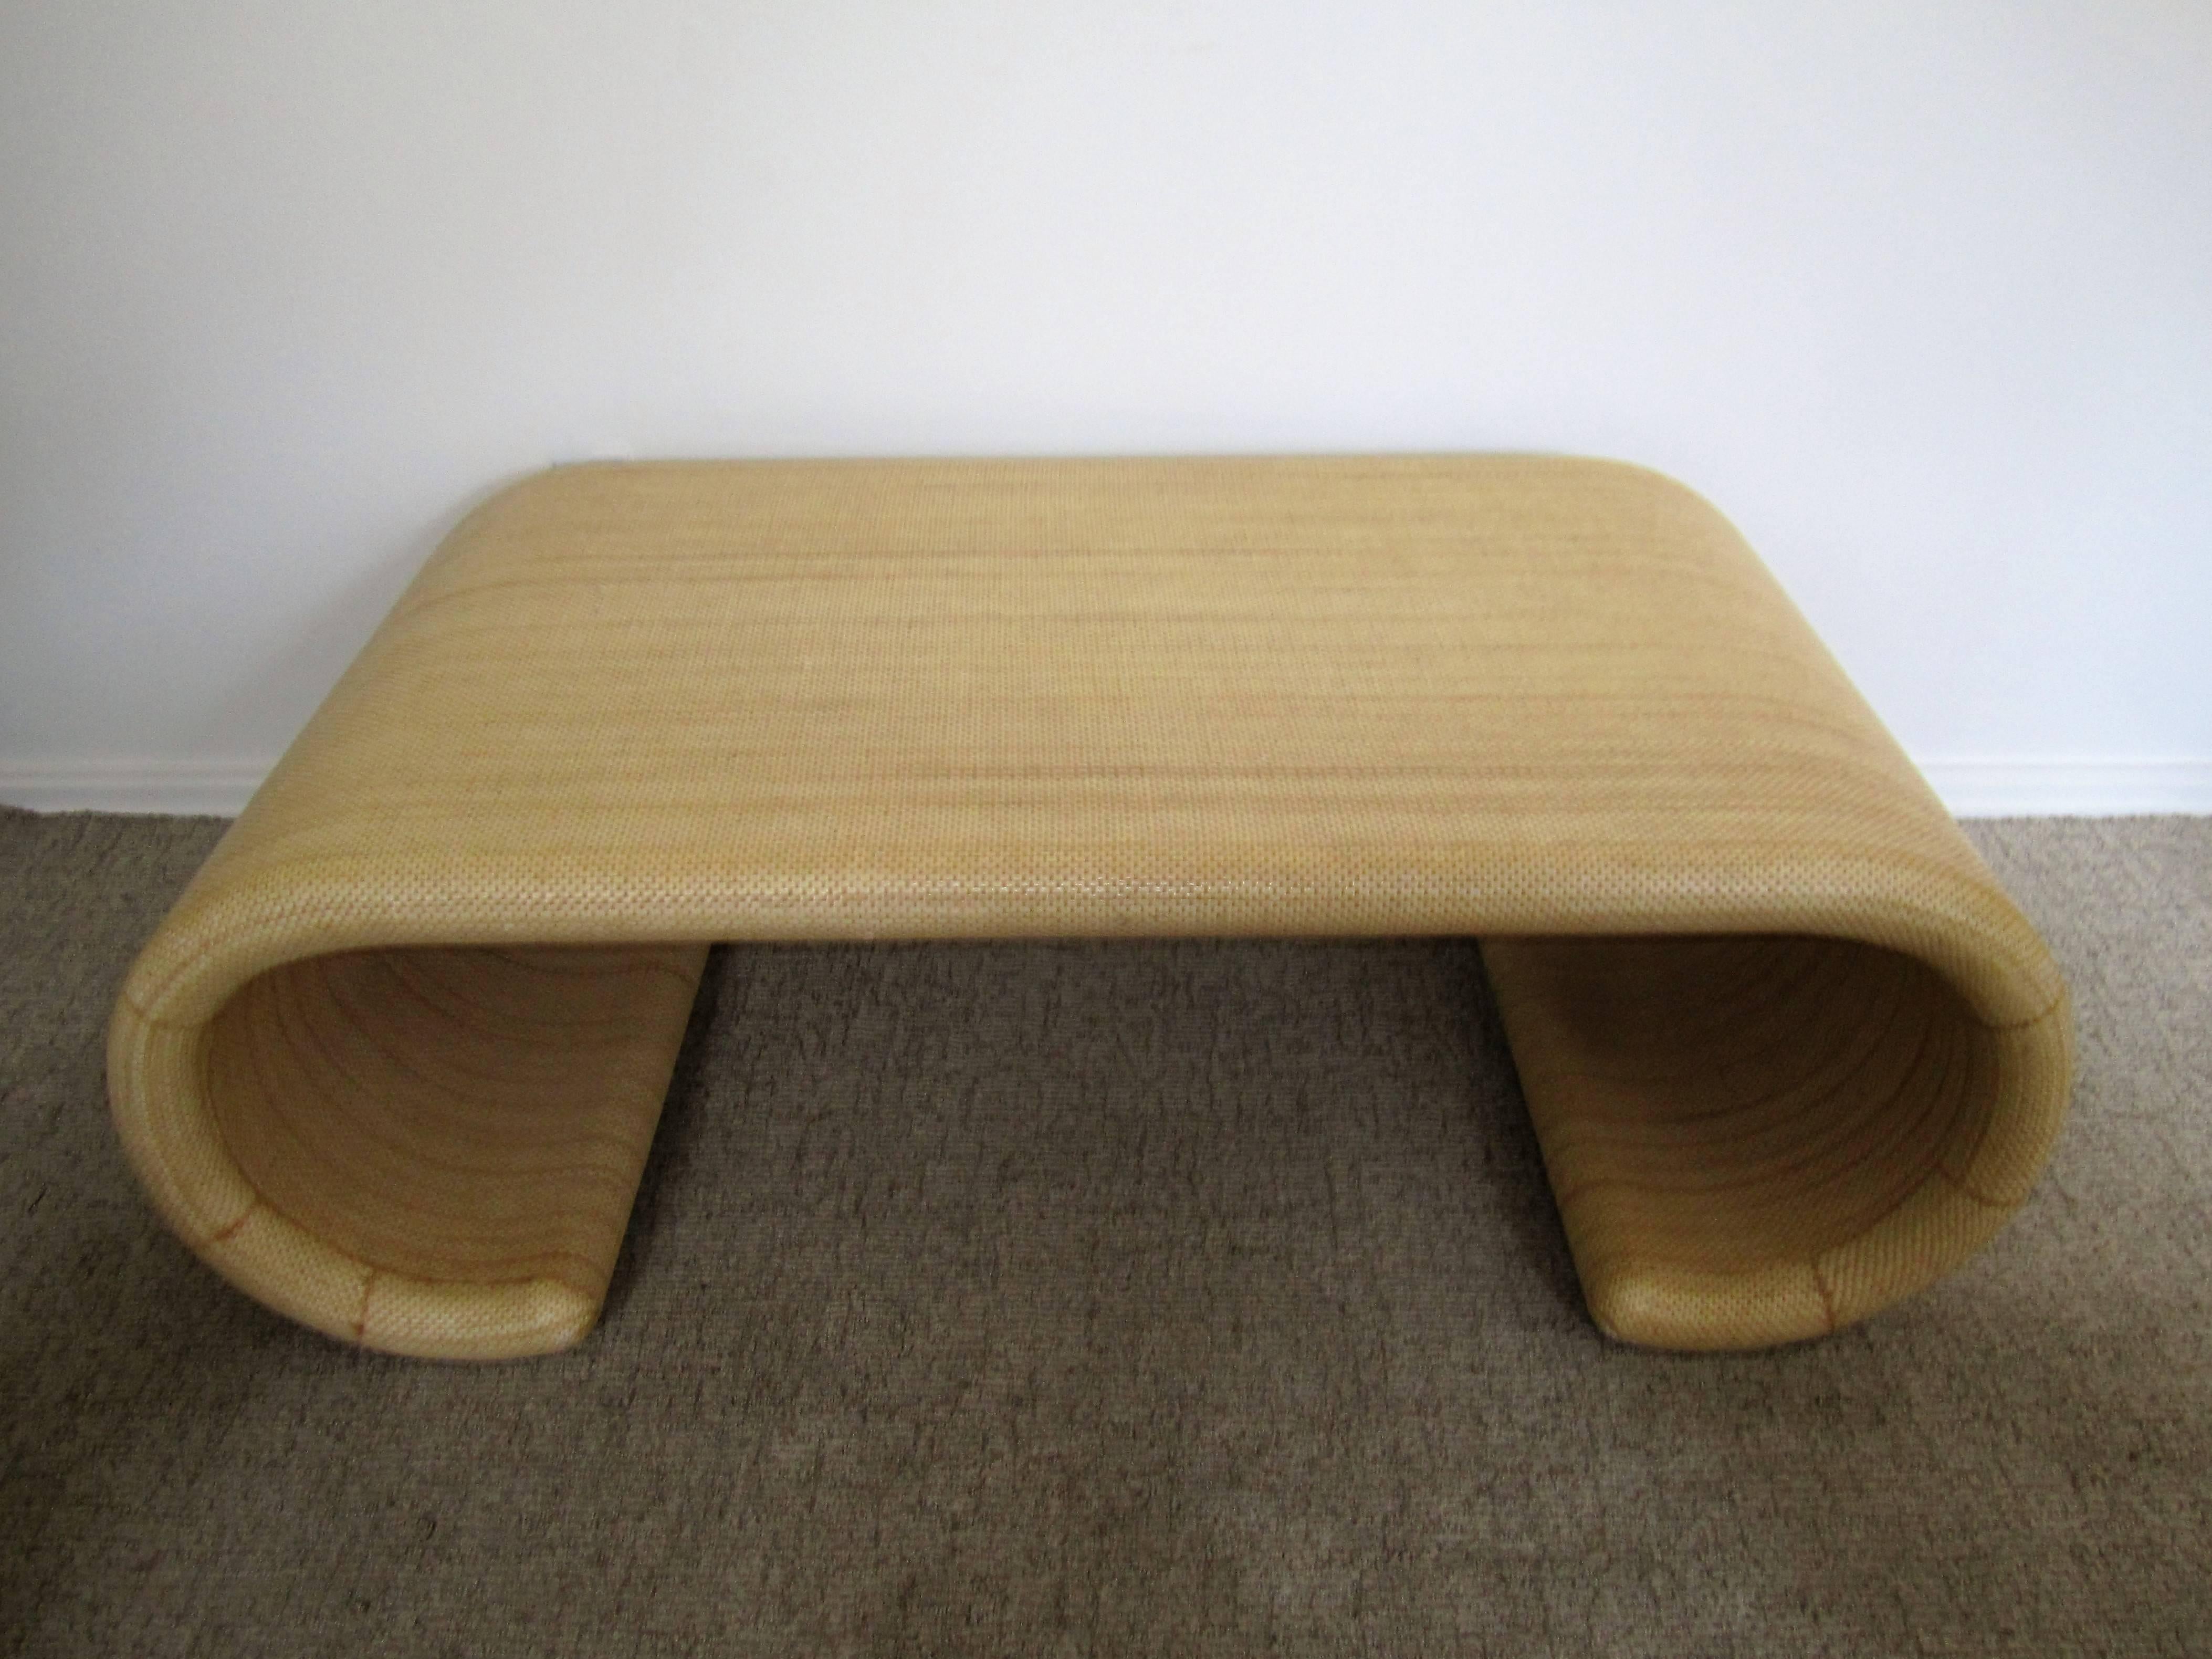 A Modern scroll coffee or cocktail table in the style of designer Karl Springer. Table is wrapped in a 'sand' or 'wheat' colored nylon grass cloth material, circa 1980s - 1990s.

Table is available here online. By request, table can be made